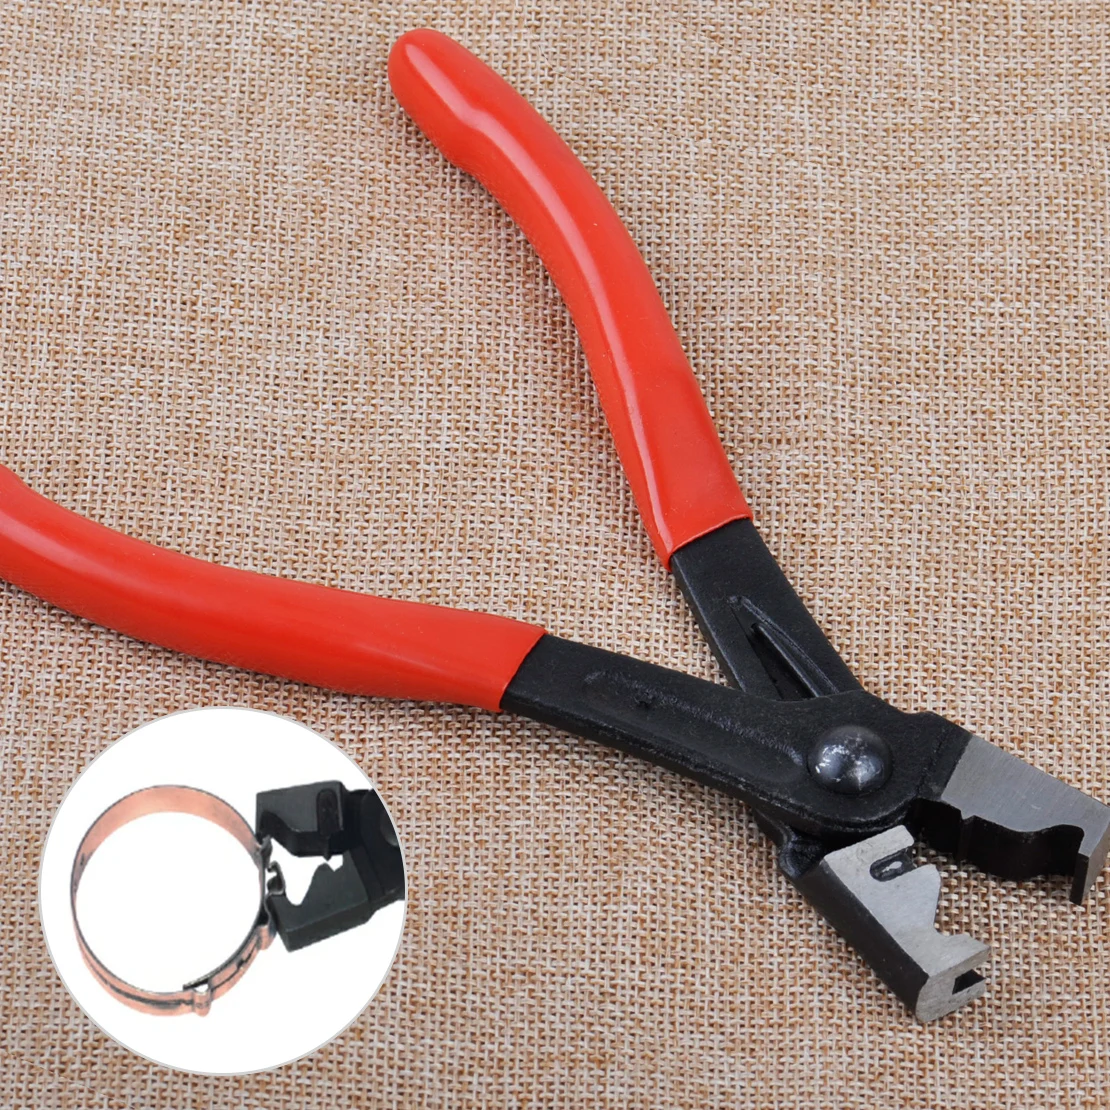 977 NEW T&E Tools Clic-R Collar Hose Clamp Pliers Small 